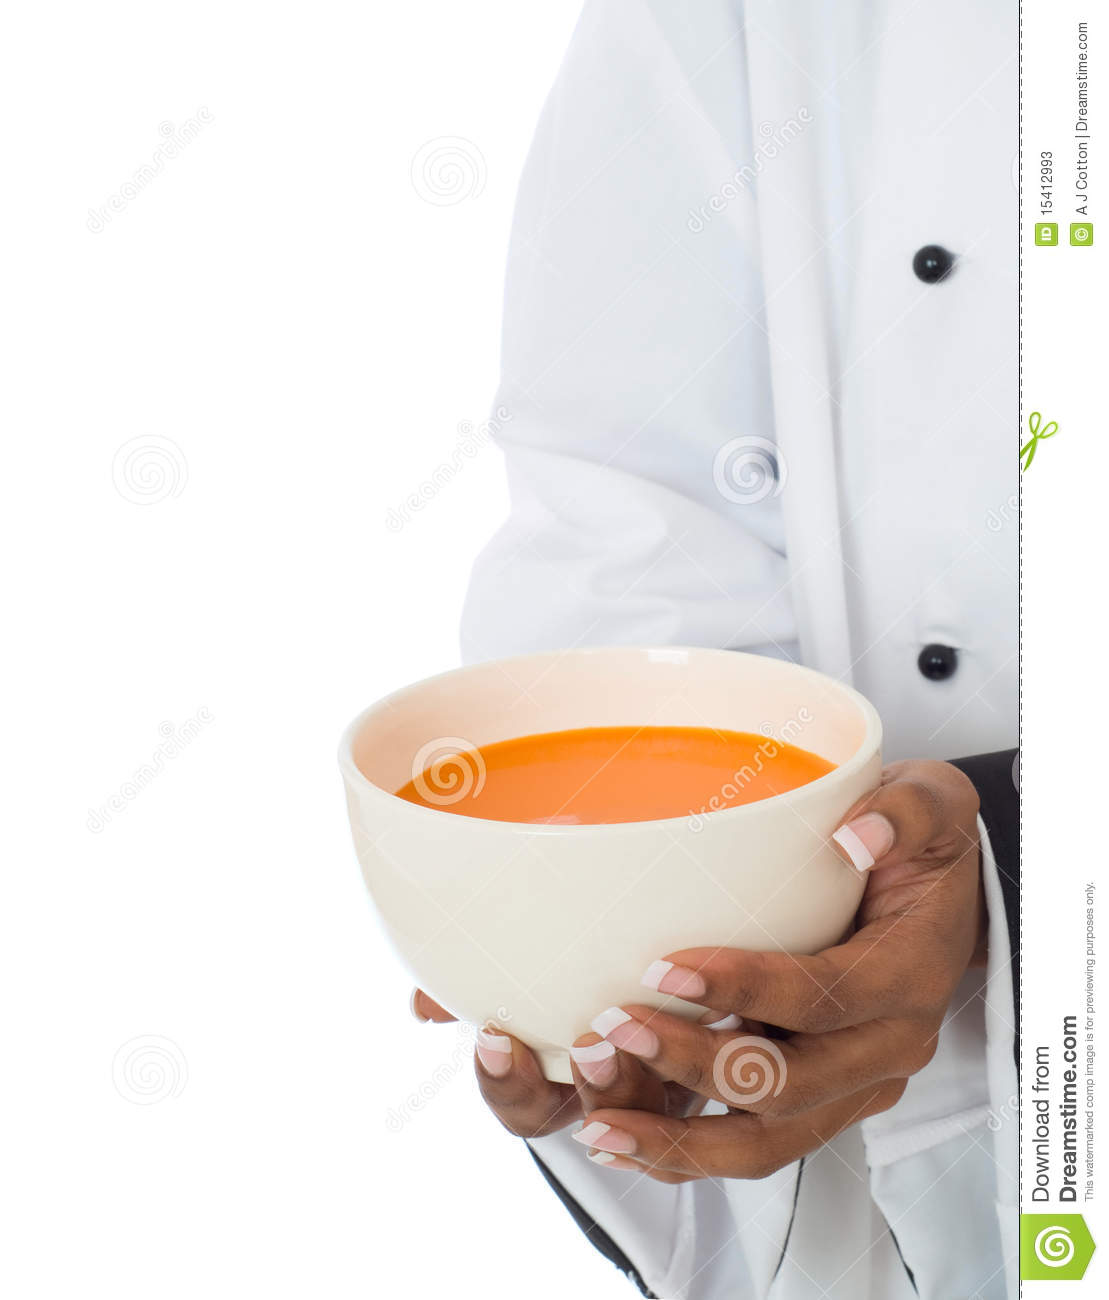 Chef Hands And Jacket Holding Or Serving Soup Food Isolated On White